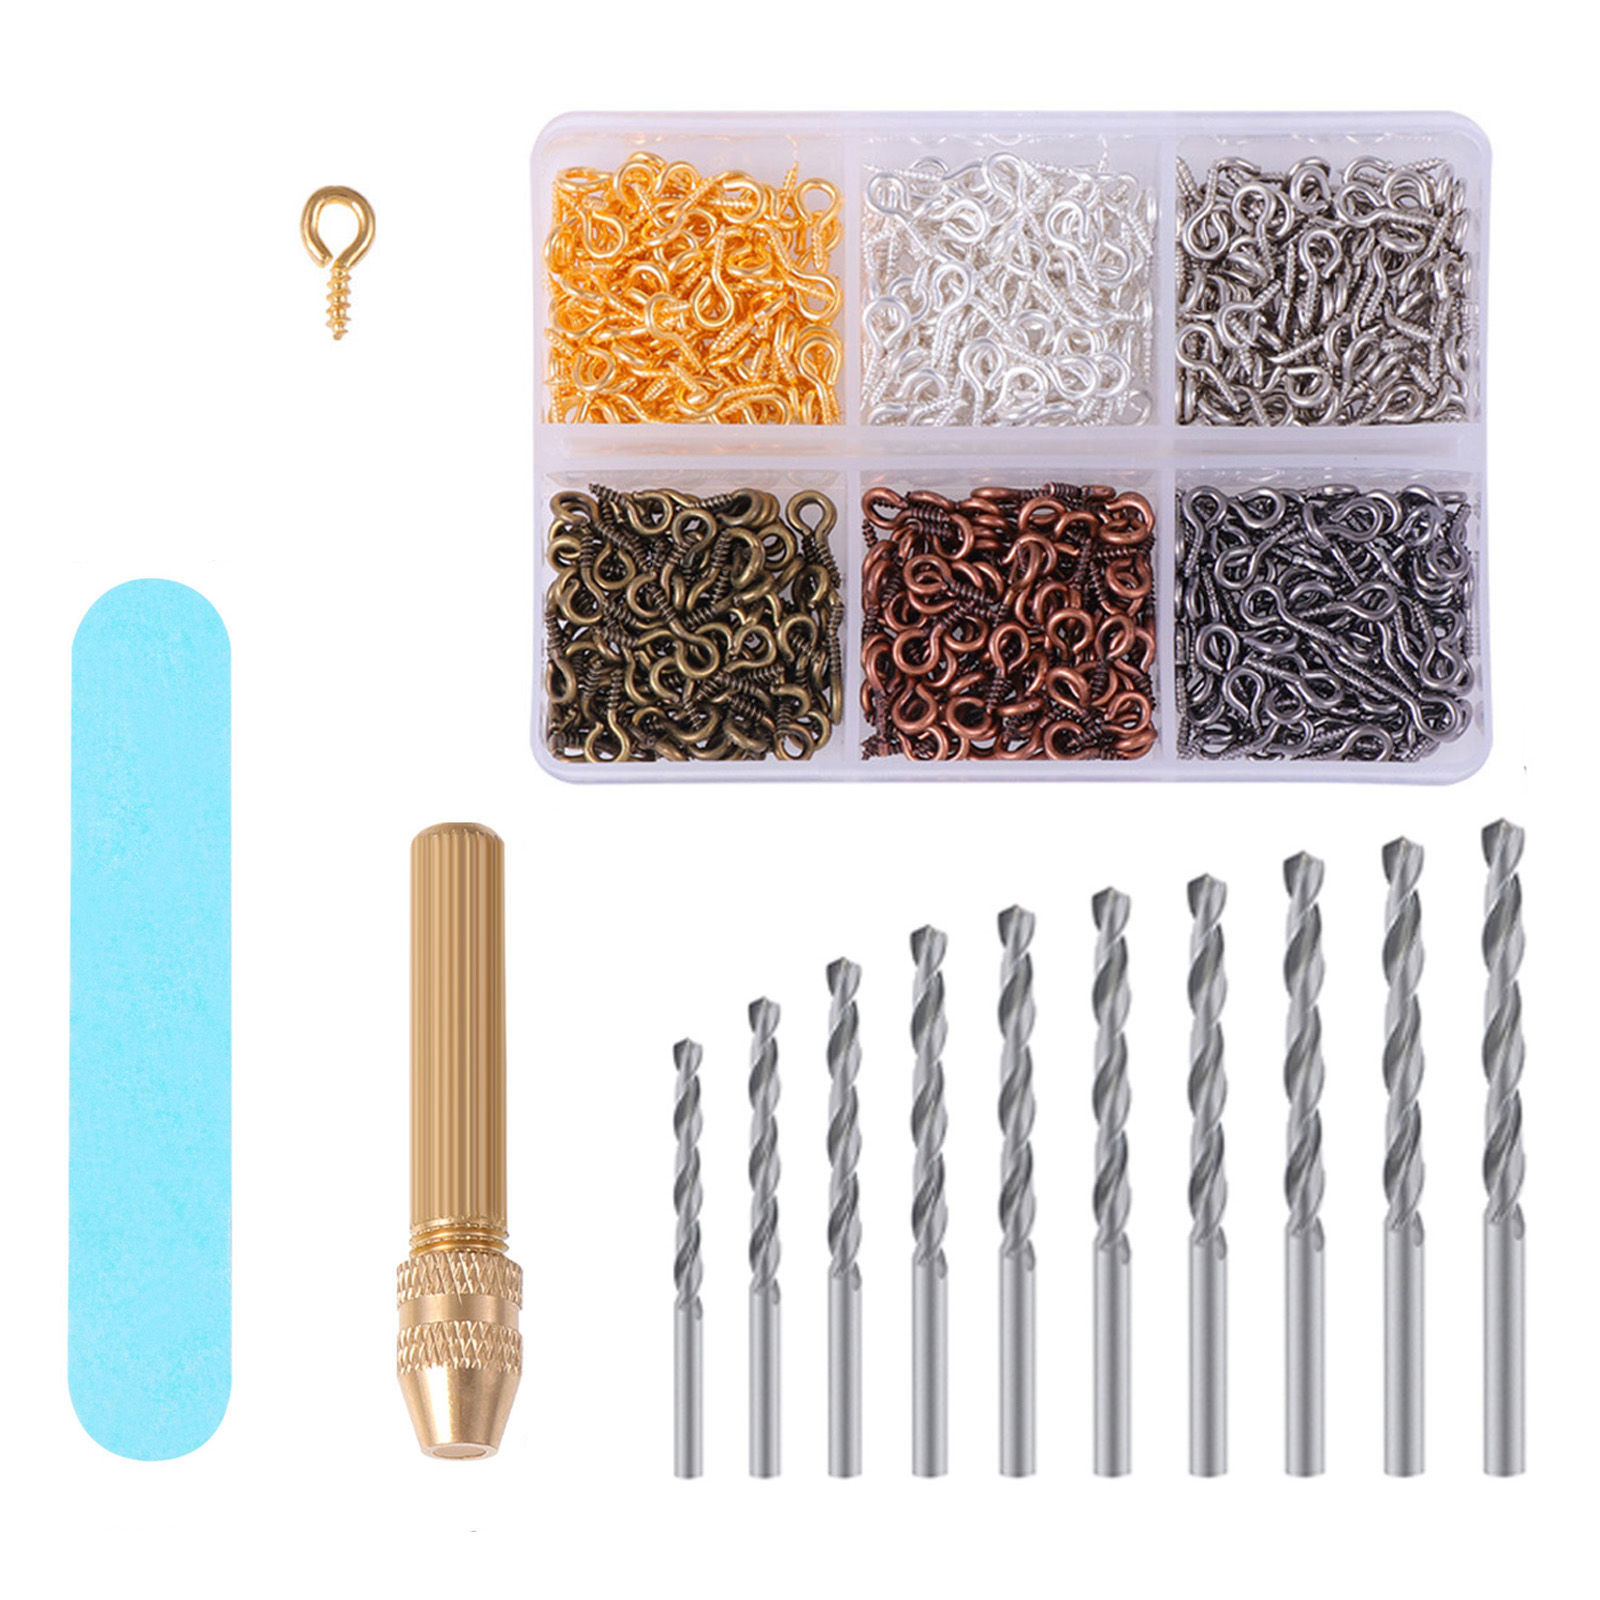 Picture of Iron Based Alloy Screw Eyes Bails Top Drilled Findings With Tools Multicolor